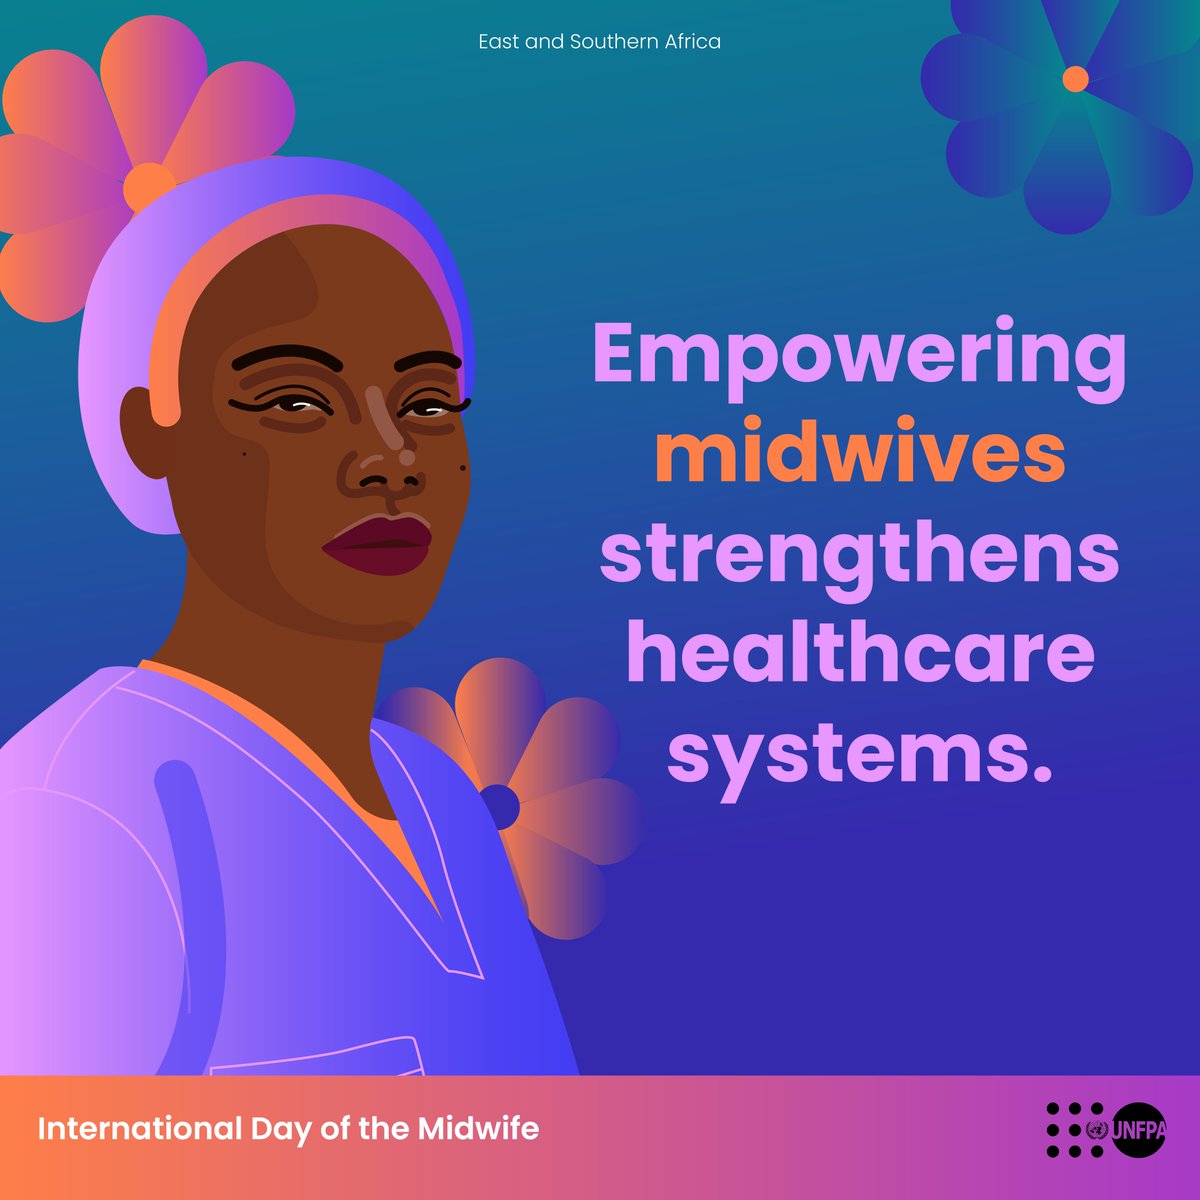 Maternal deaths affect us all. UNFPA continues working to strengthen healthcare systems and empower midwives to ensure no mother dies giving life. #EndMaternalMortality #HealthEquity